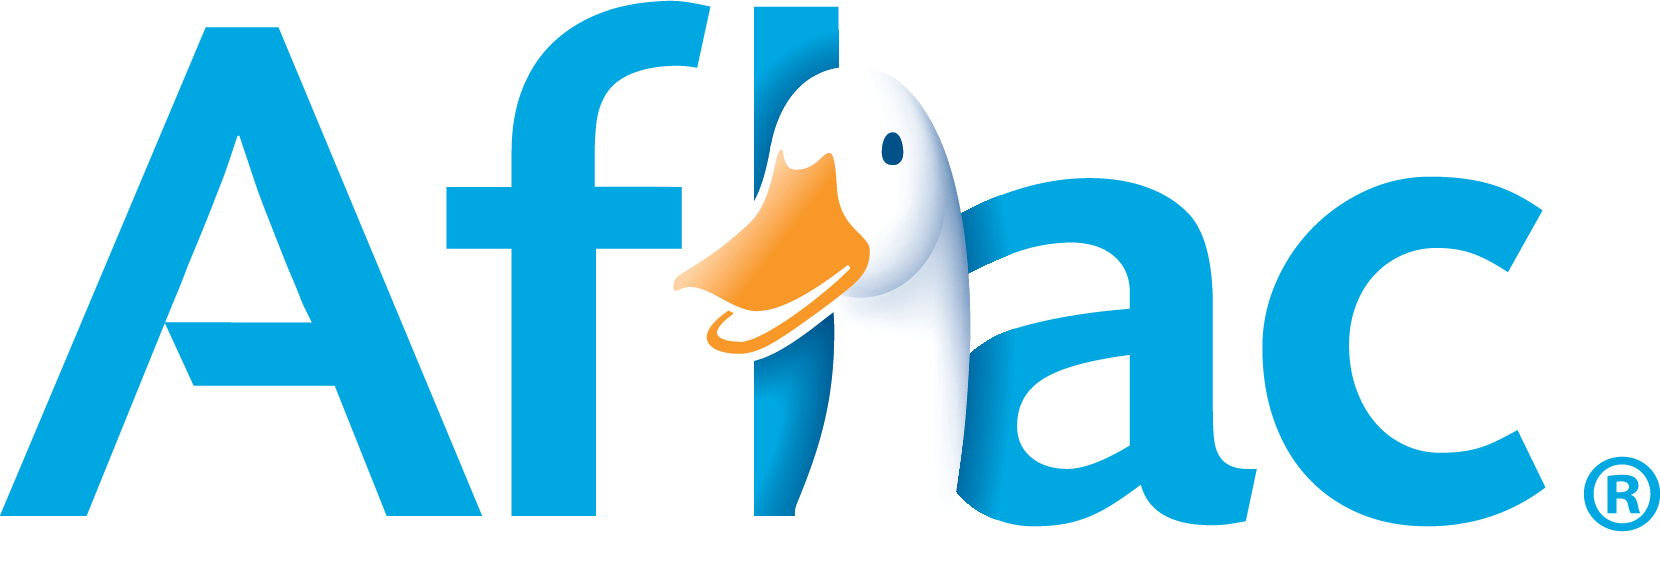 Aflac: Purpose ... With Feathers- Logo